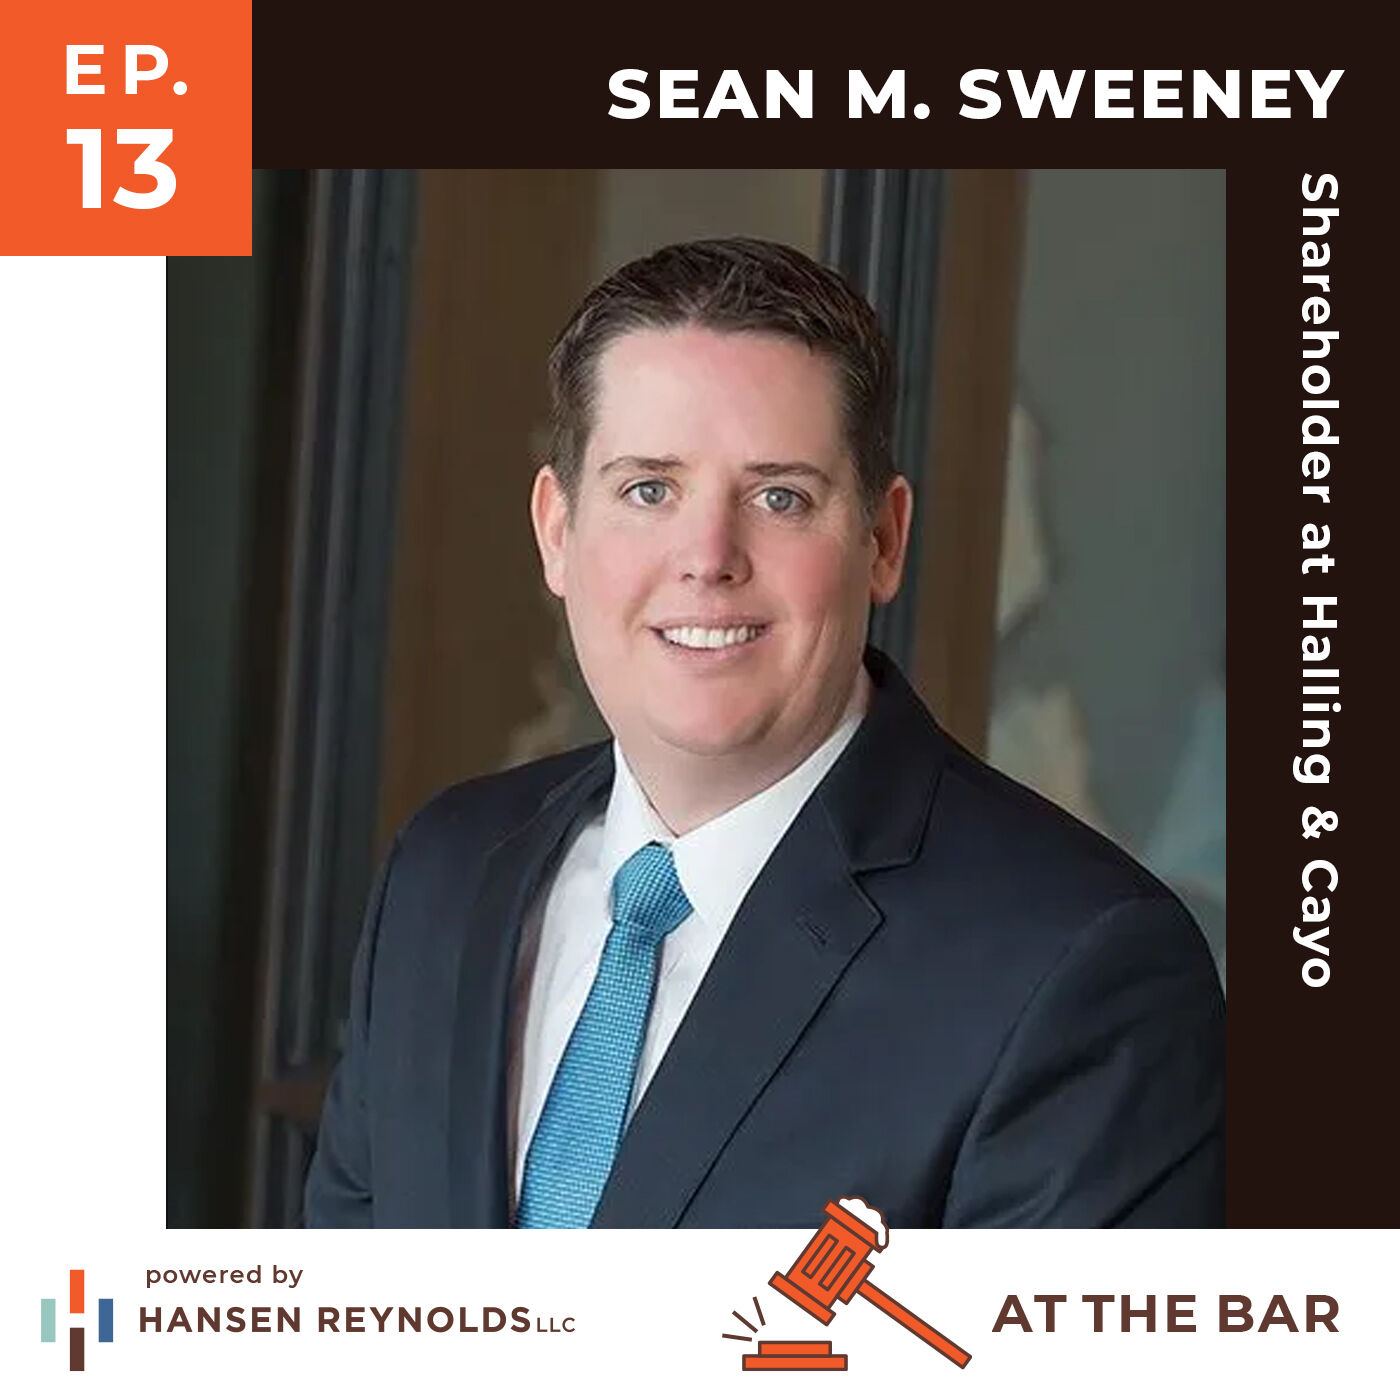 At the Bar episode thirteen cover with Sean Sweeney